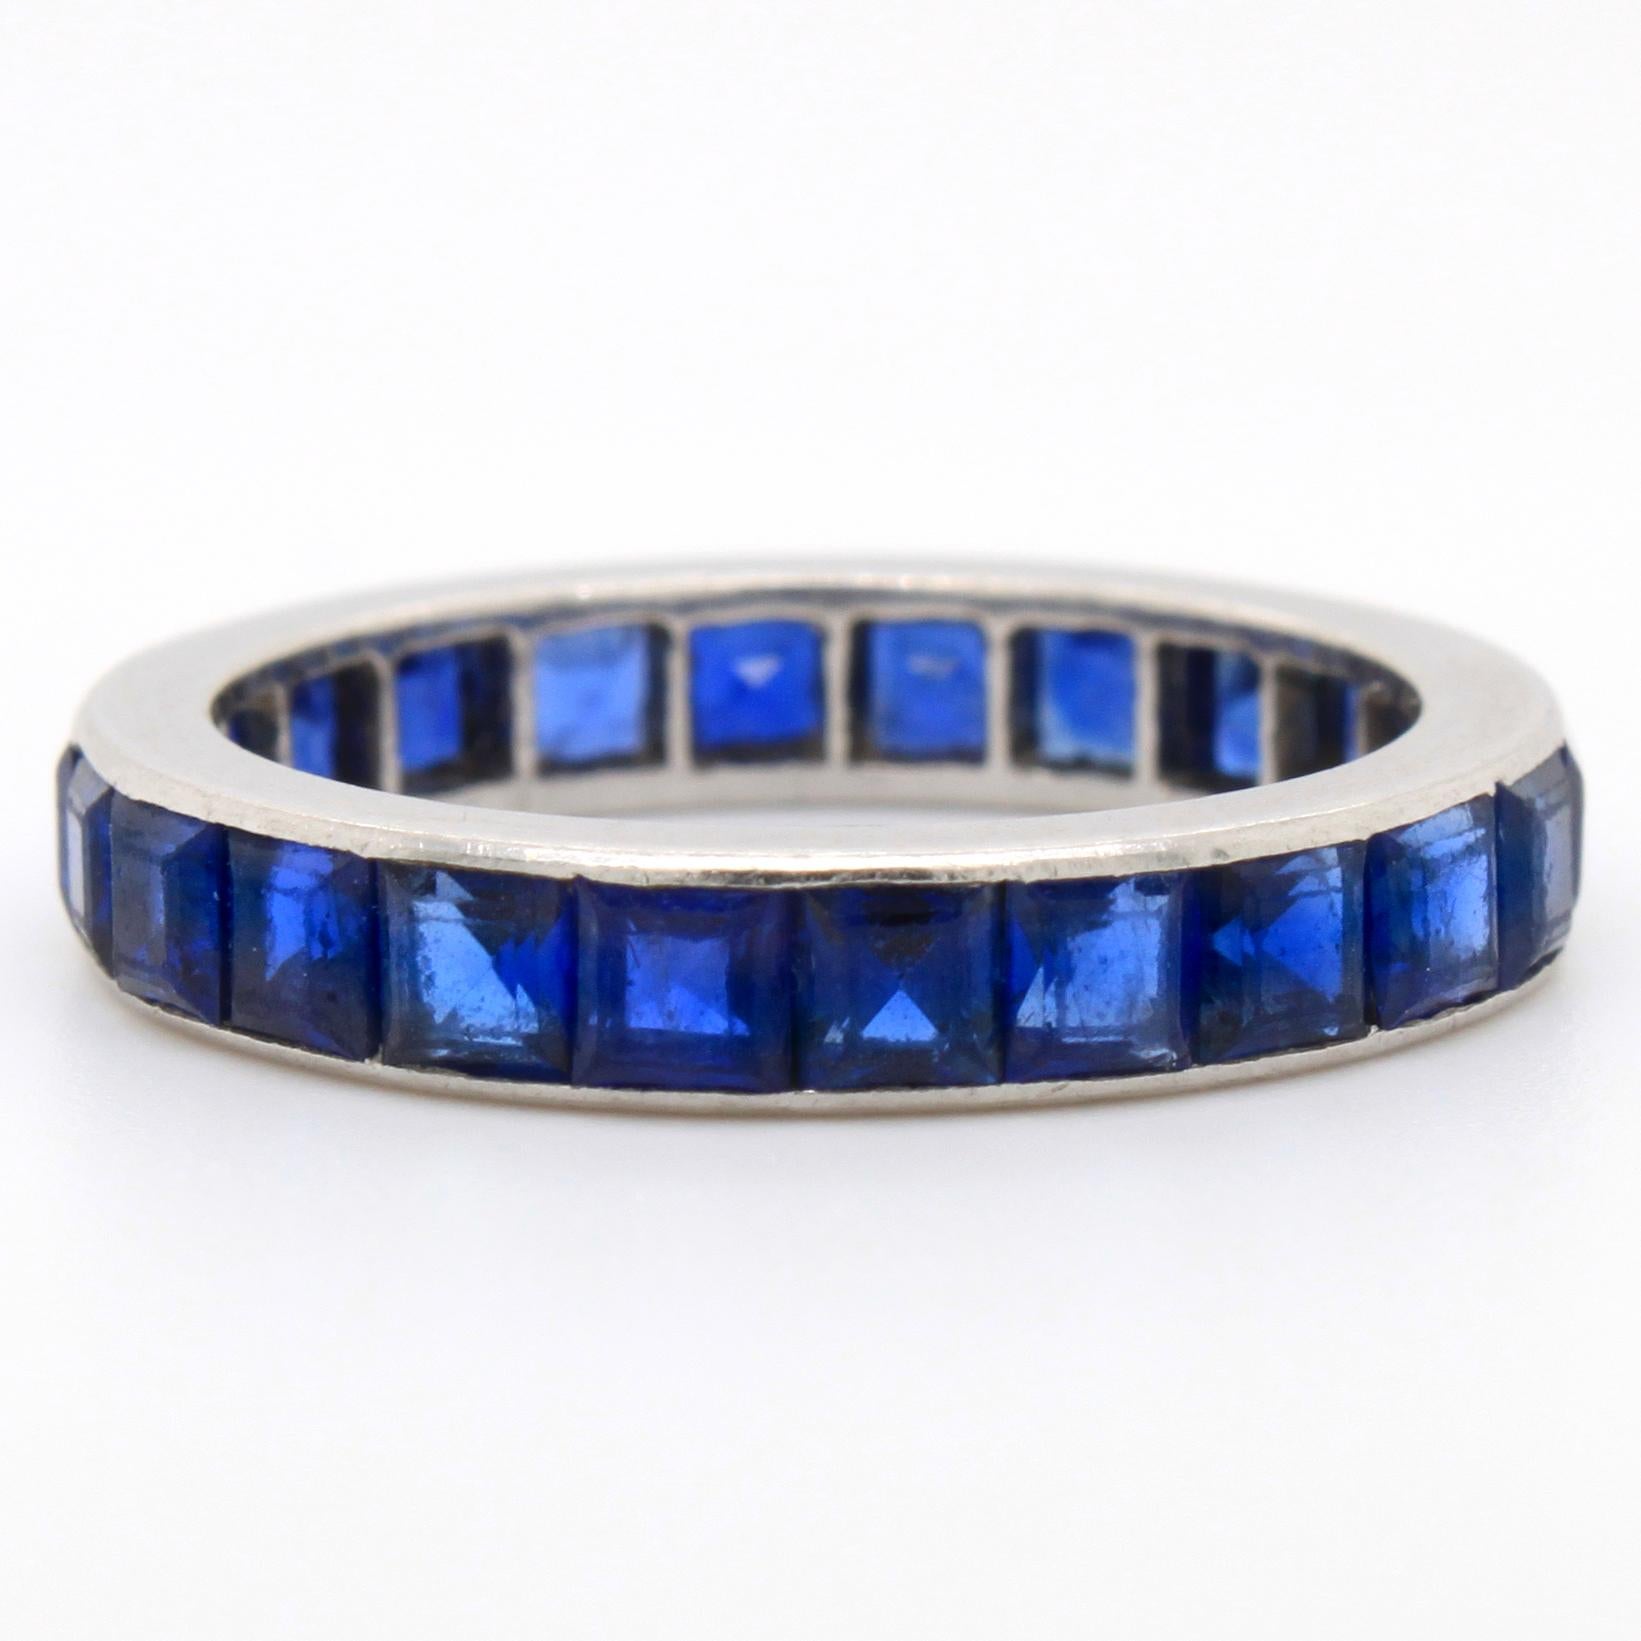 A eternity ring with square cut sapphires by Cartier. The sapphires have a beautiful blue colour and weigh approximately 2.5 carats. The ring has a rubbed but distinct Cartier signature. 

Ring size 53.